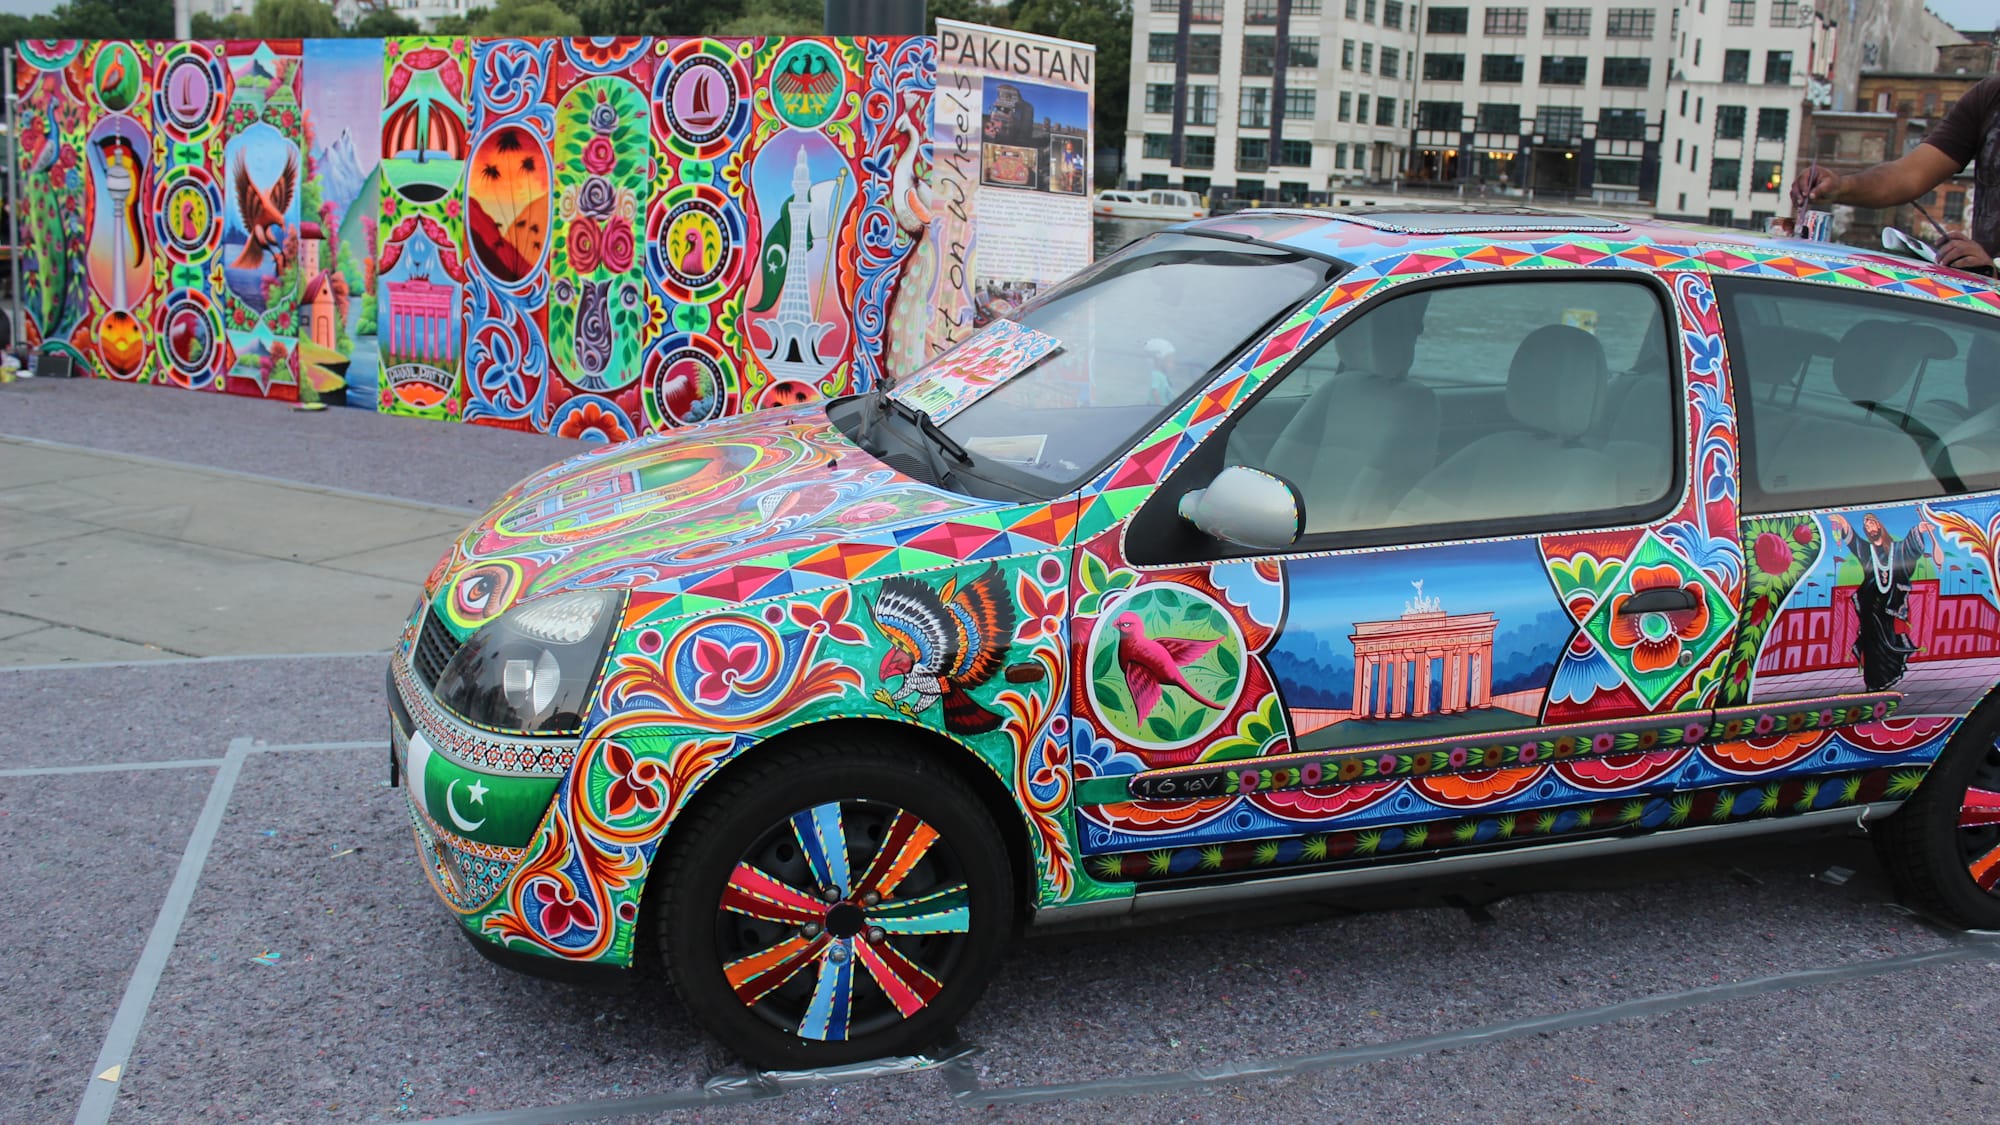 A car in front of a mural, with both decorated in brightly coloured pictorials, patterns and motifs.